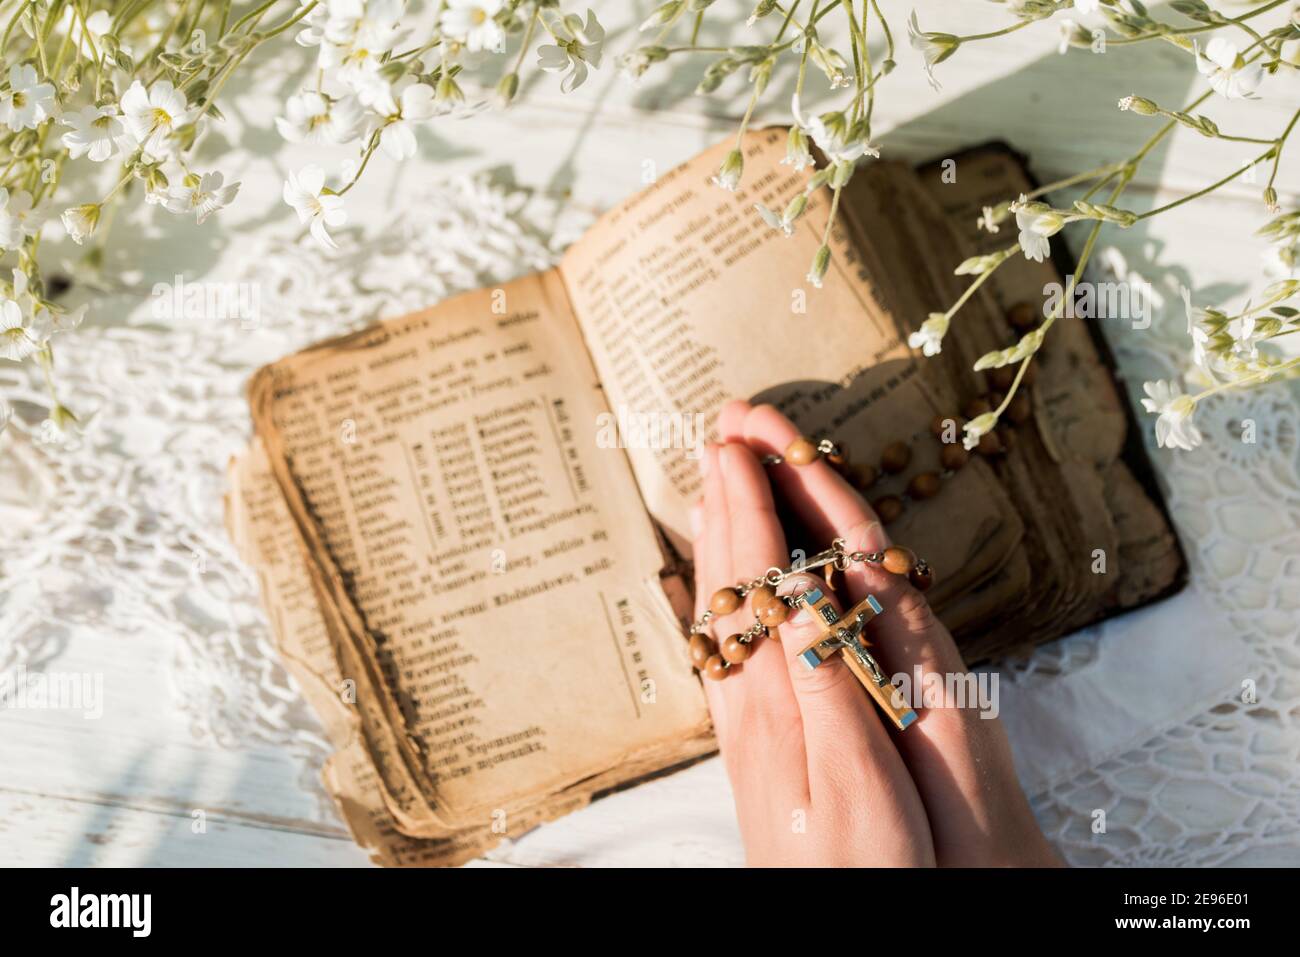 Hands folded in prayer over old Holy Bible. Wooden background.Hands and rosary, prayer, old book with yellow pages. white flowers on a background. in Stock Photo